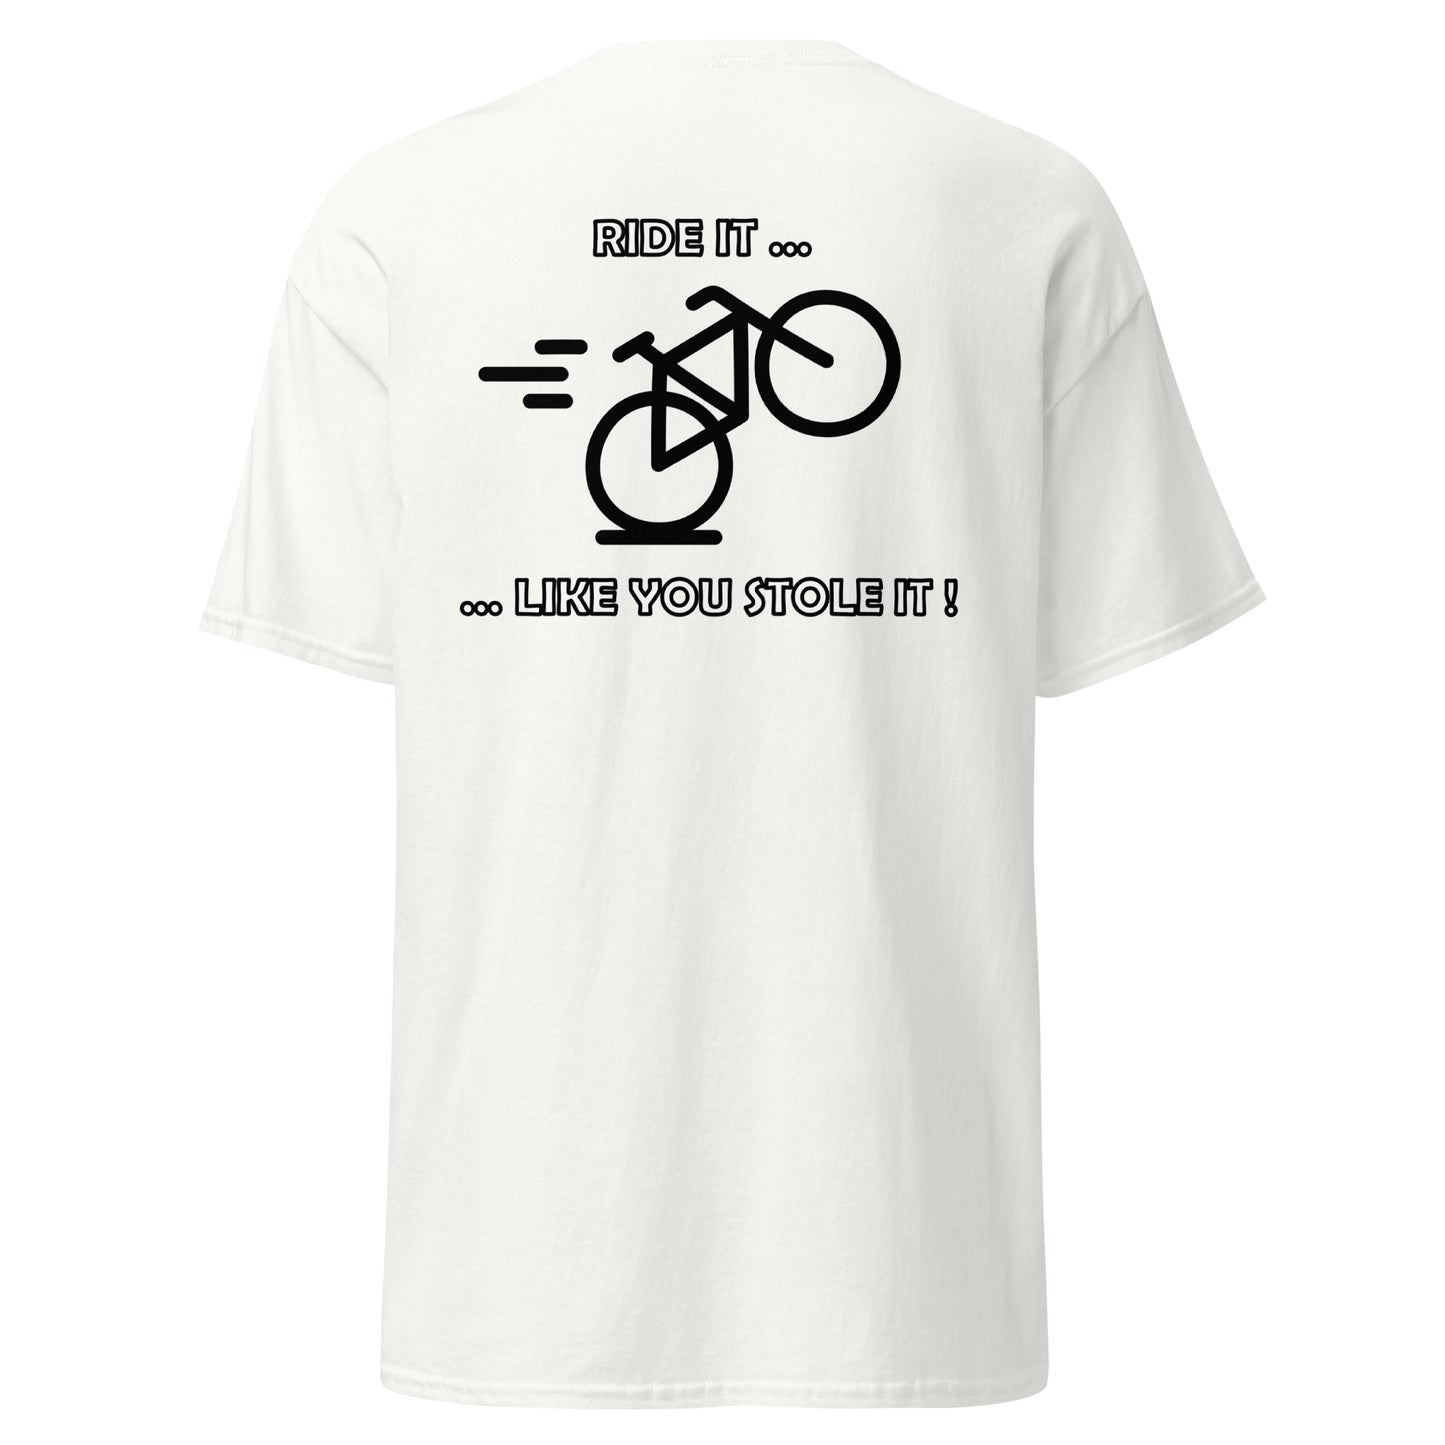 Ride it like you stole it Tee-shirt White